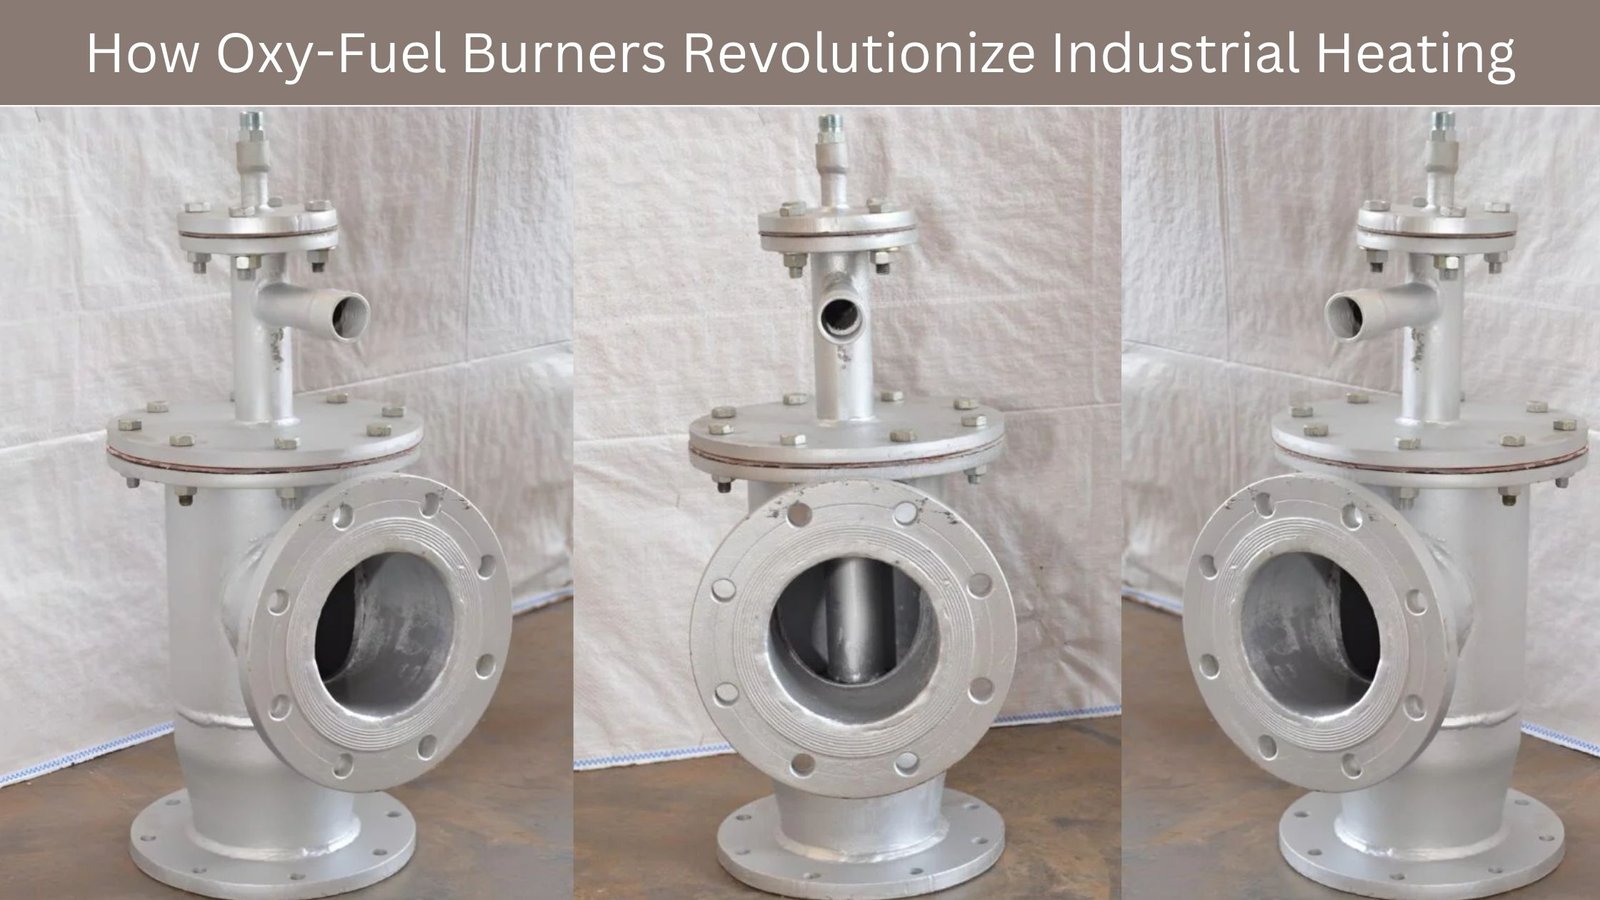 how oxy-fuel burners revolutionize industrial heating - encon thermal engineers